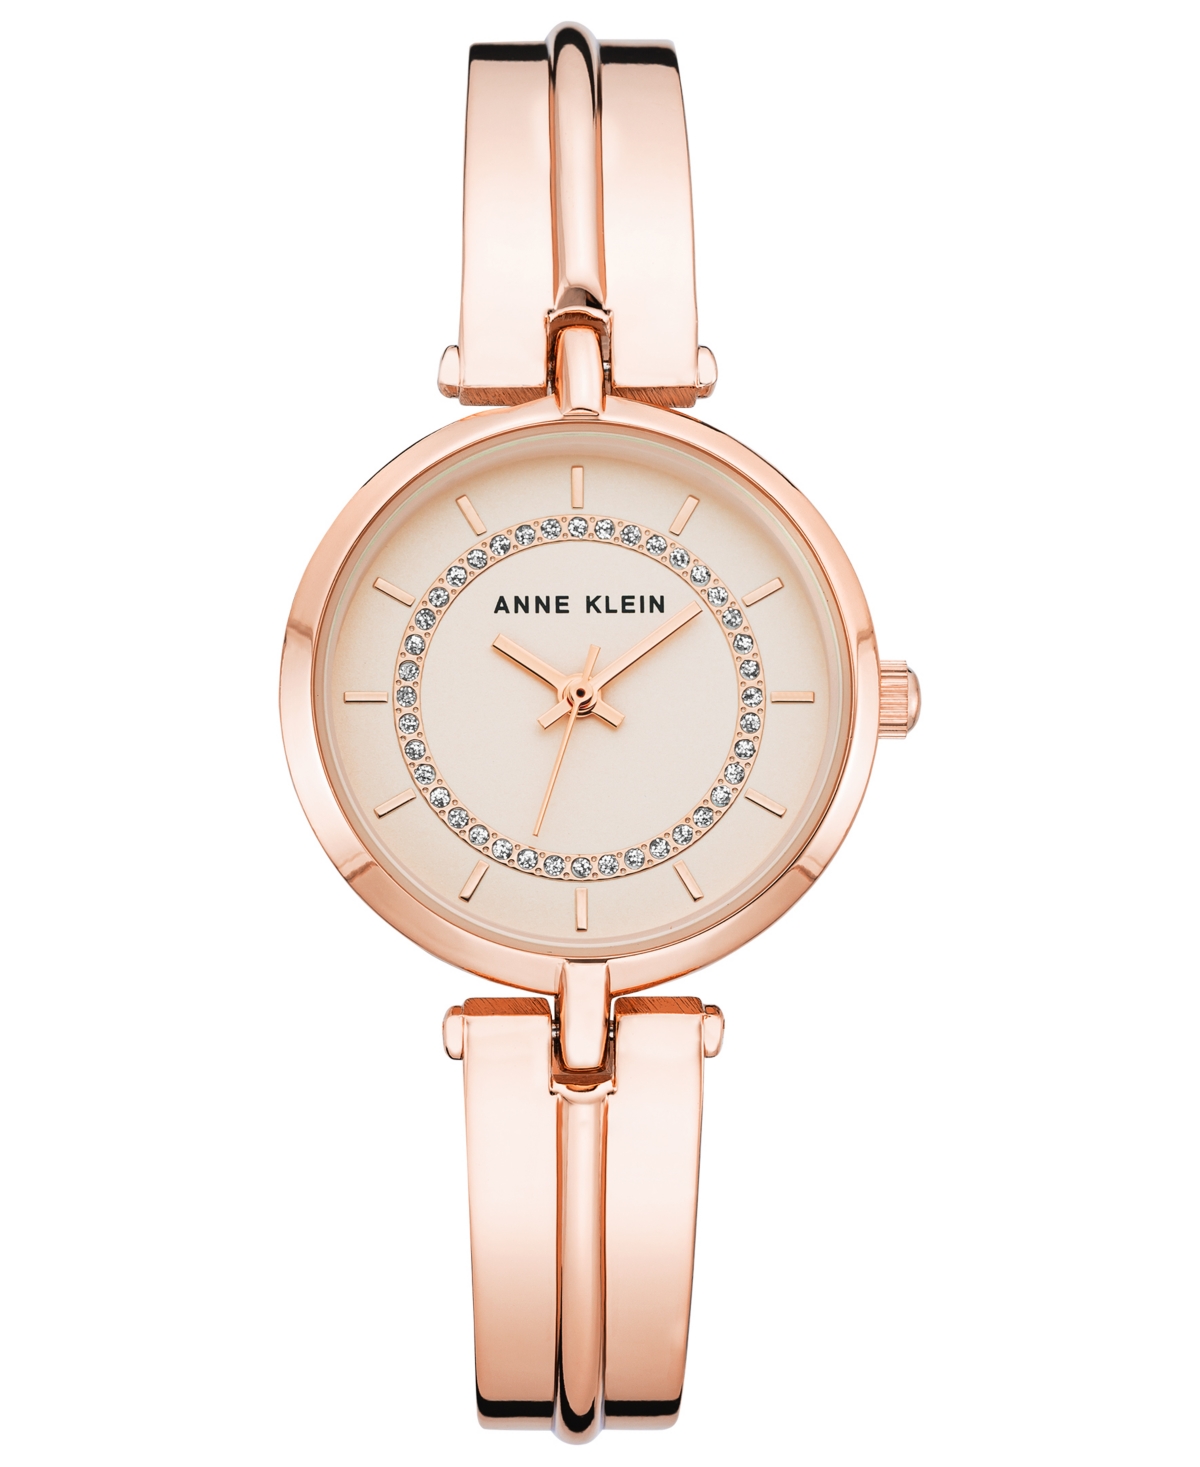 Anne Klein Women's Rose Gold-tone Alloy Bangle With Silver Glitter Watch, 38mm